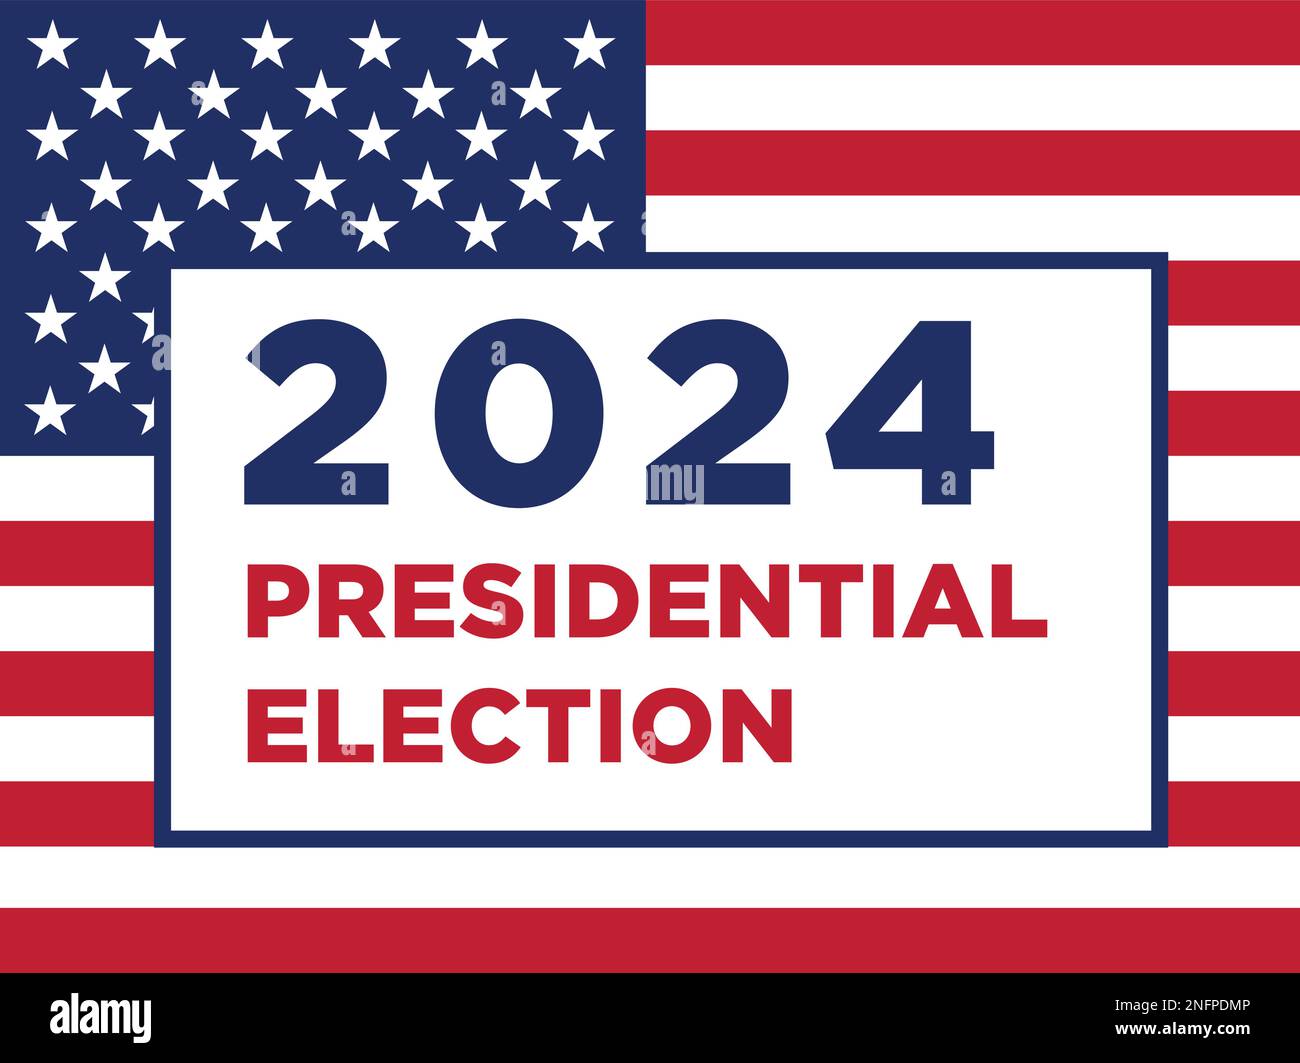 2024 presidential election banner icon illustration Stock Vector Image